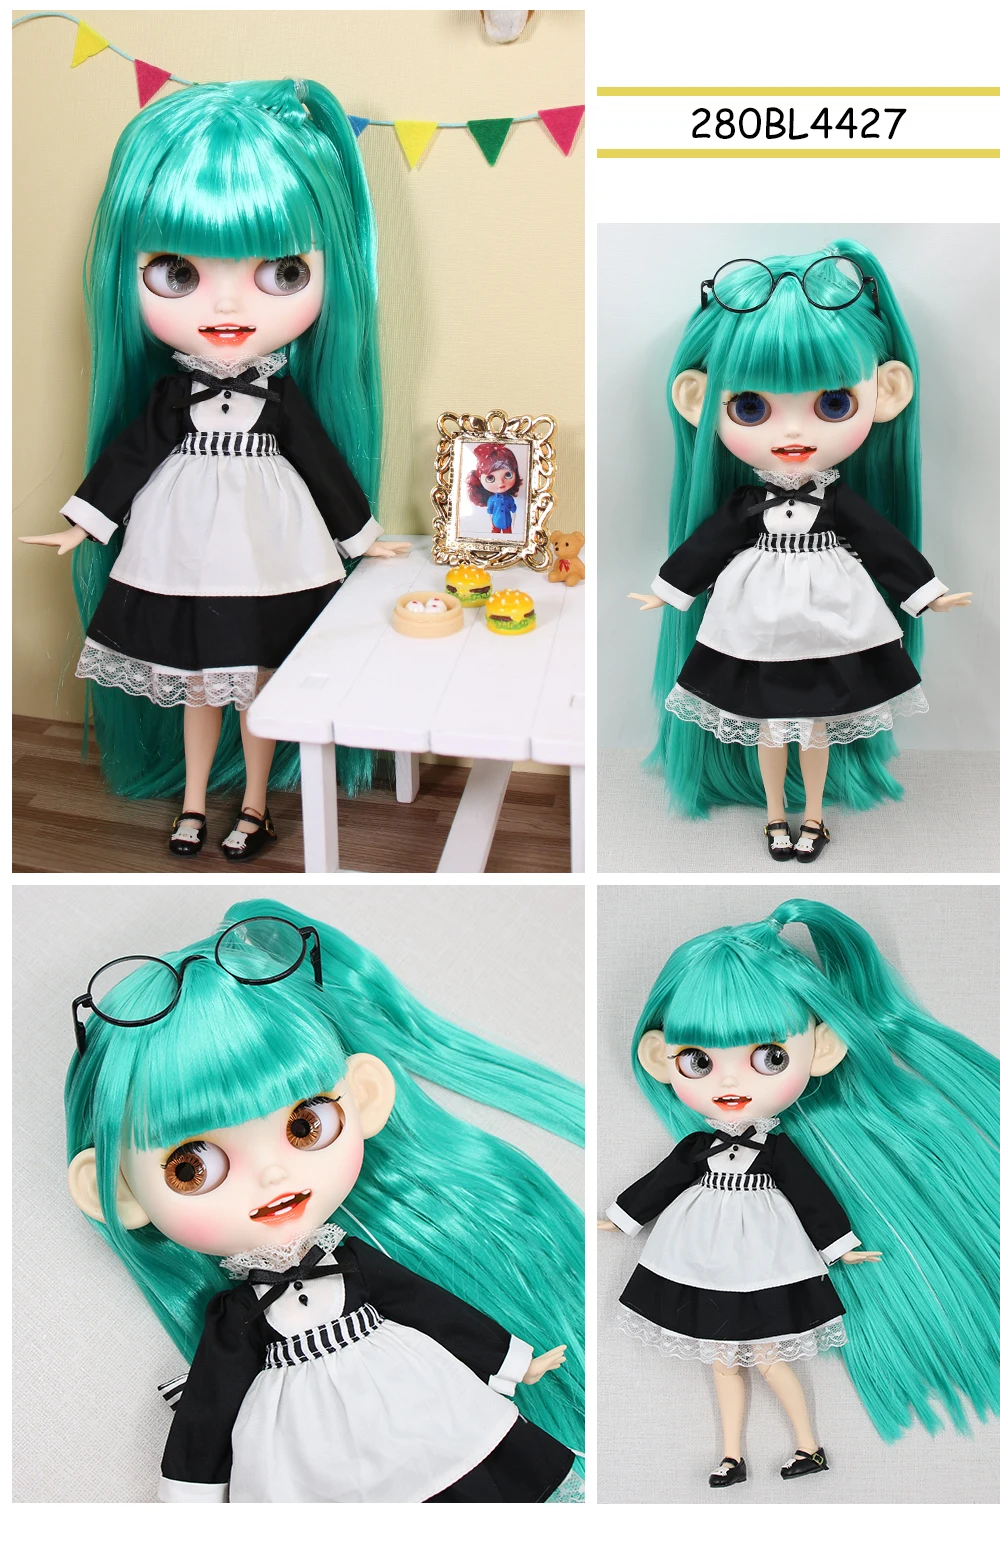 Catalina – Premium Custom Neo Blythe Doll with Turquoise Hair, White Skin & Matte Smiling Face 1